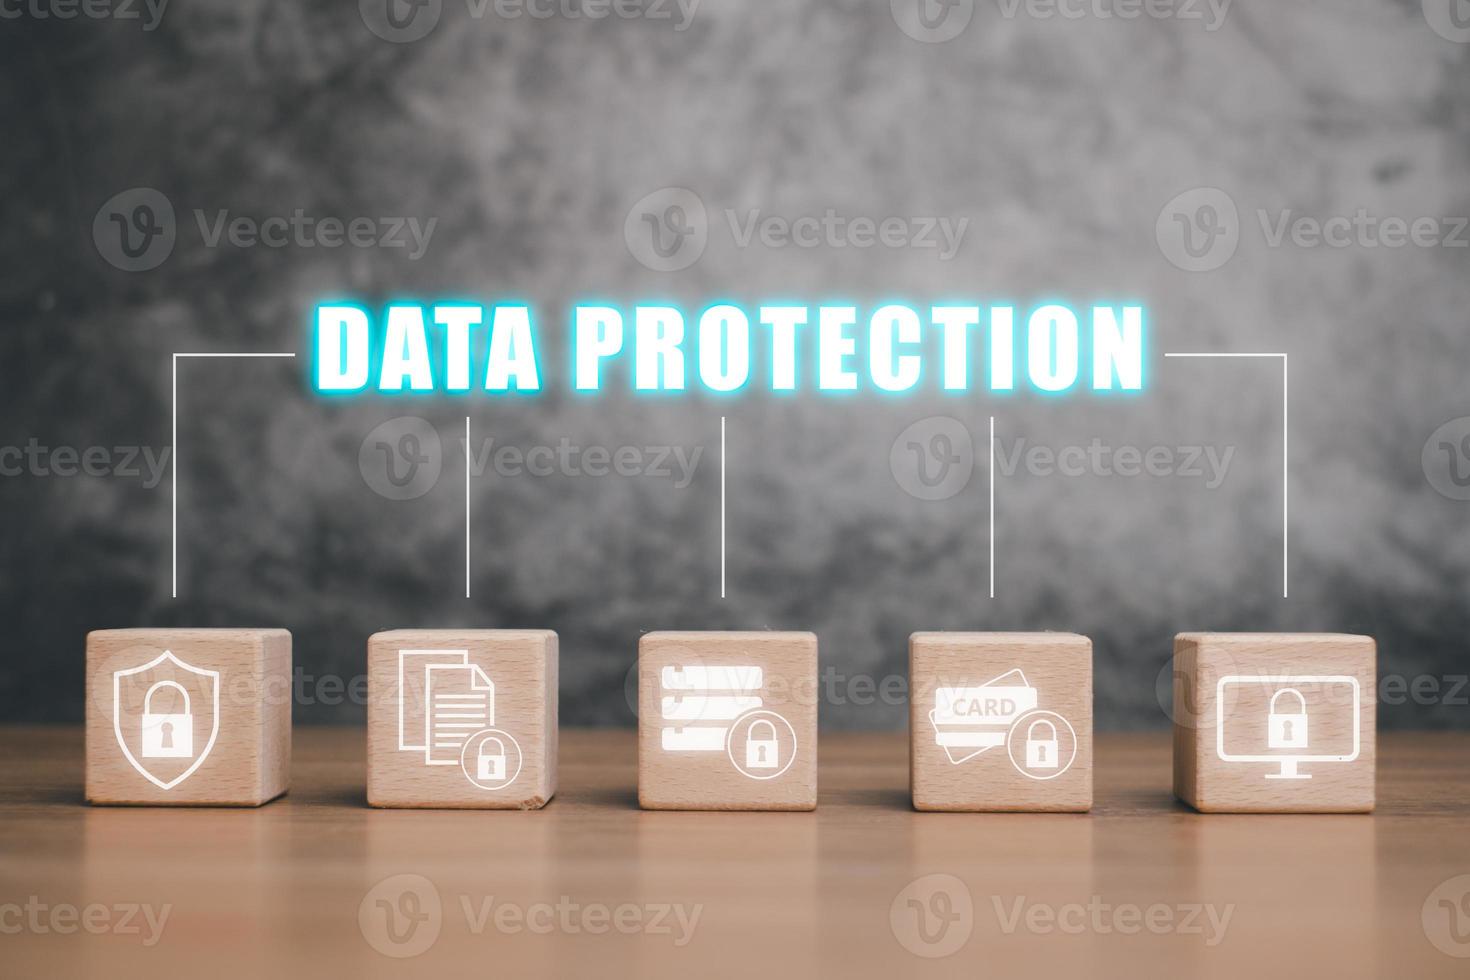 Data protection privacy concept, Wooden block on wooden desk with data protection icon on virtual screen, GDPR, EU. photo